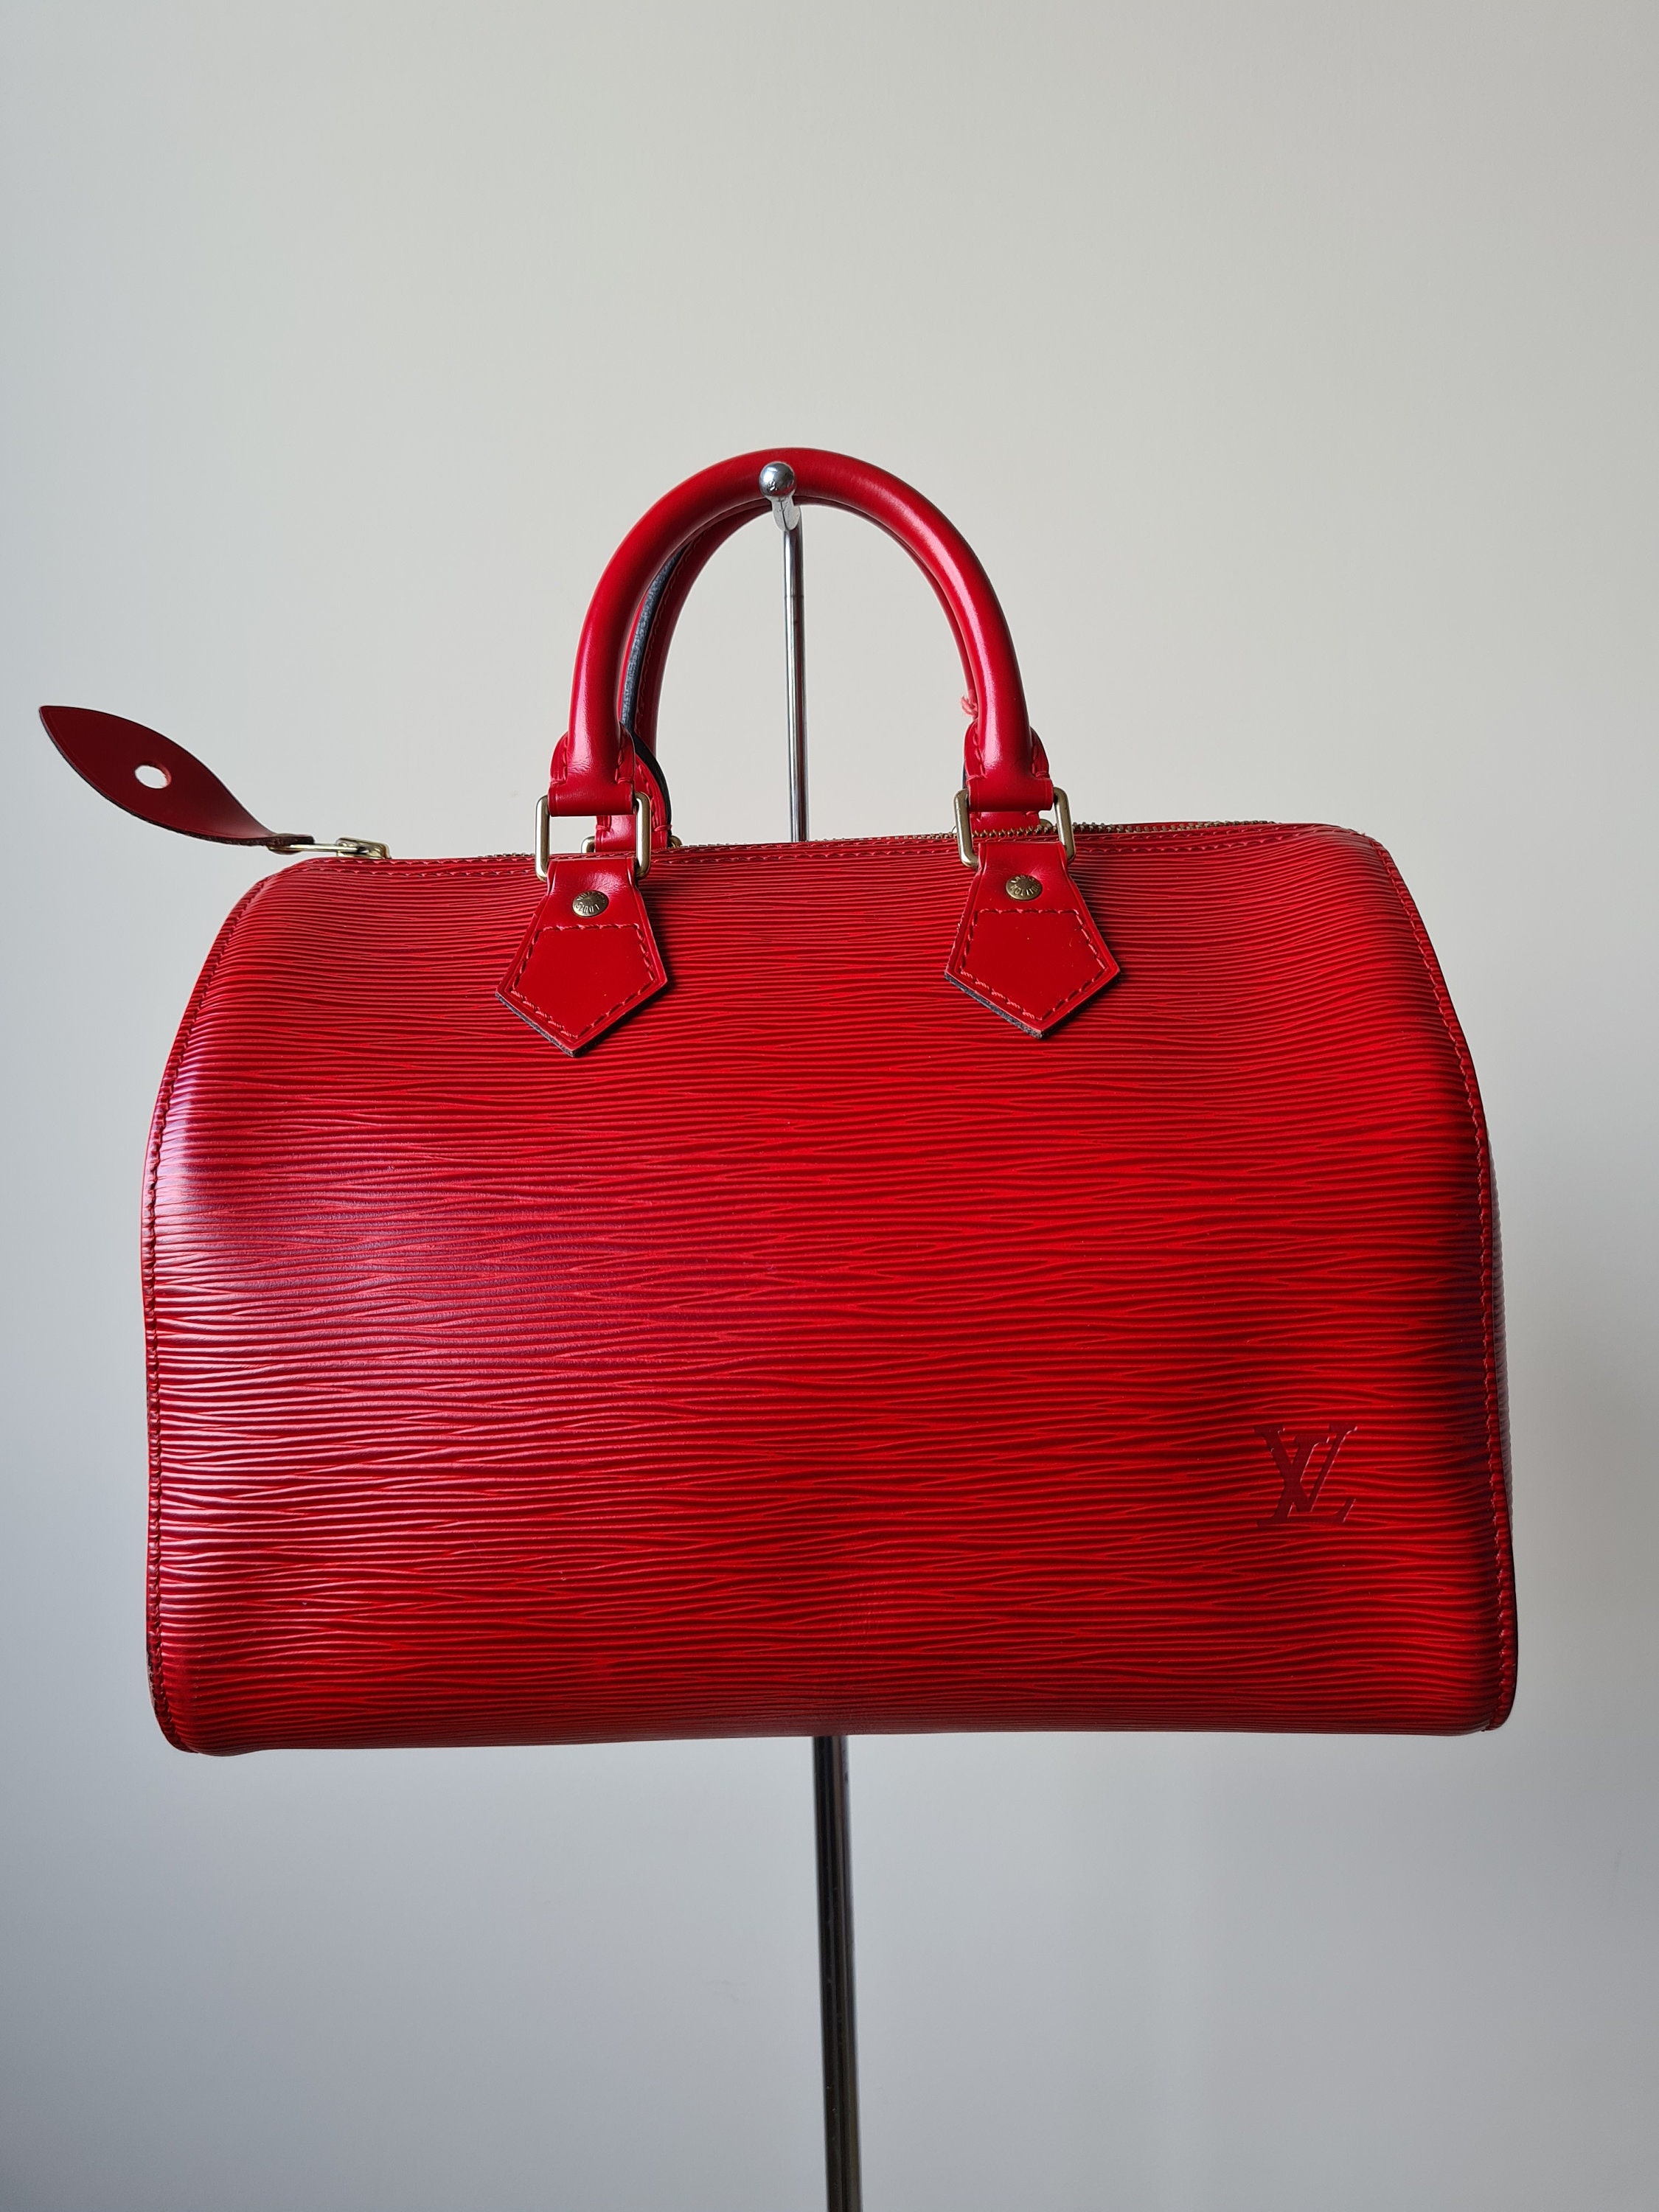 Louis Vuitton Red Bag - 284 For Sale on 1stDibs